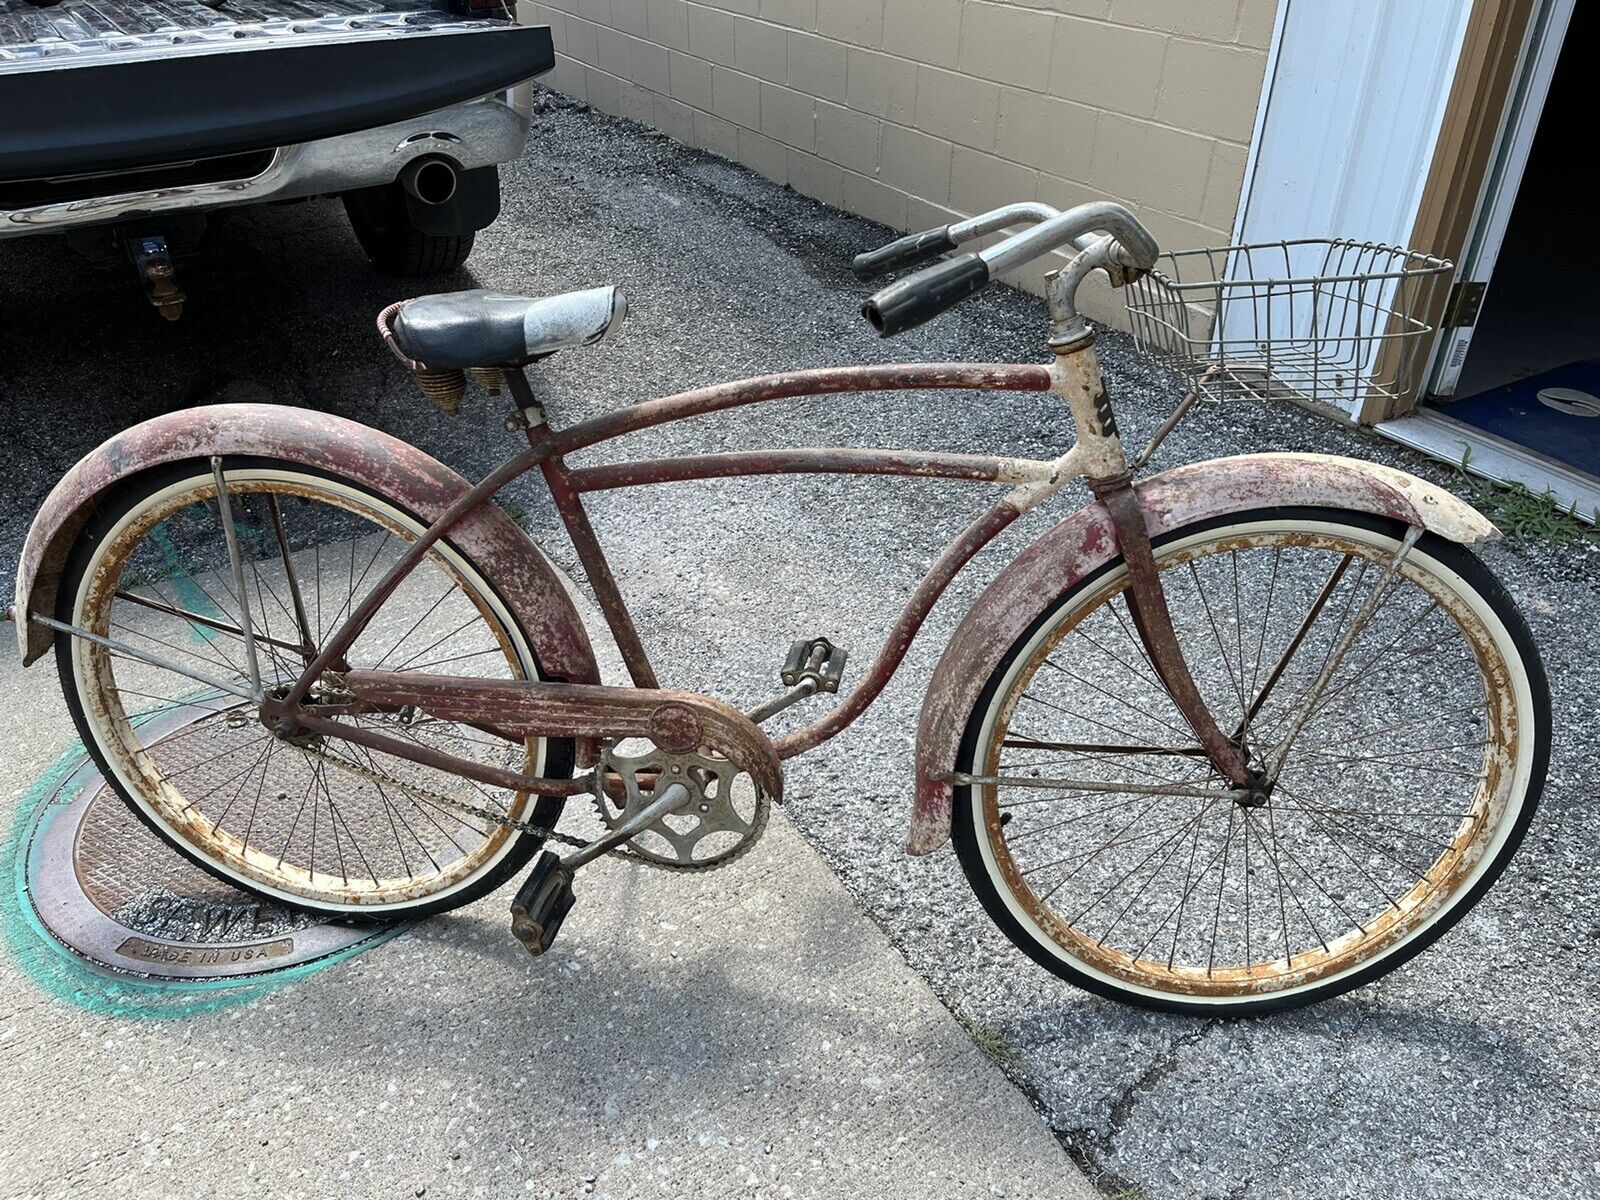 Late 40s? schwinn excelsior Vintage Bike. Only Seen One My Whole Life